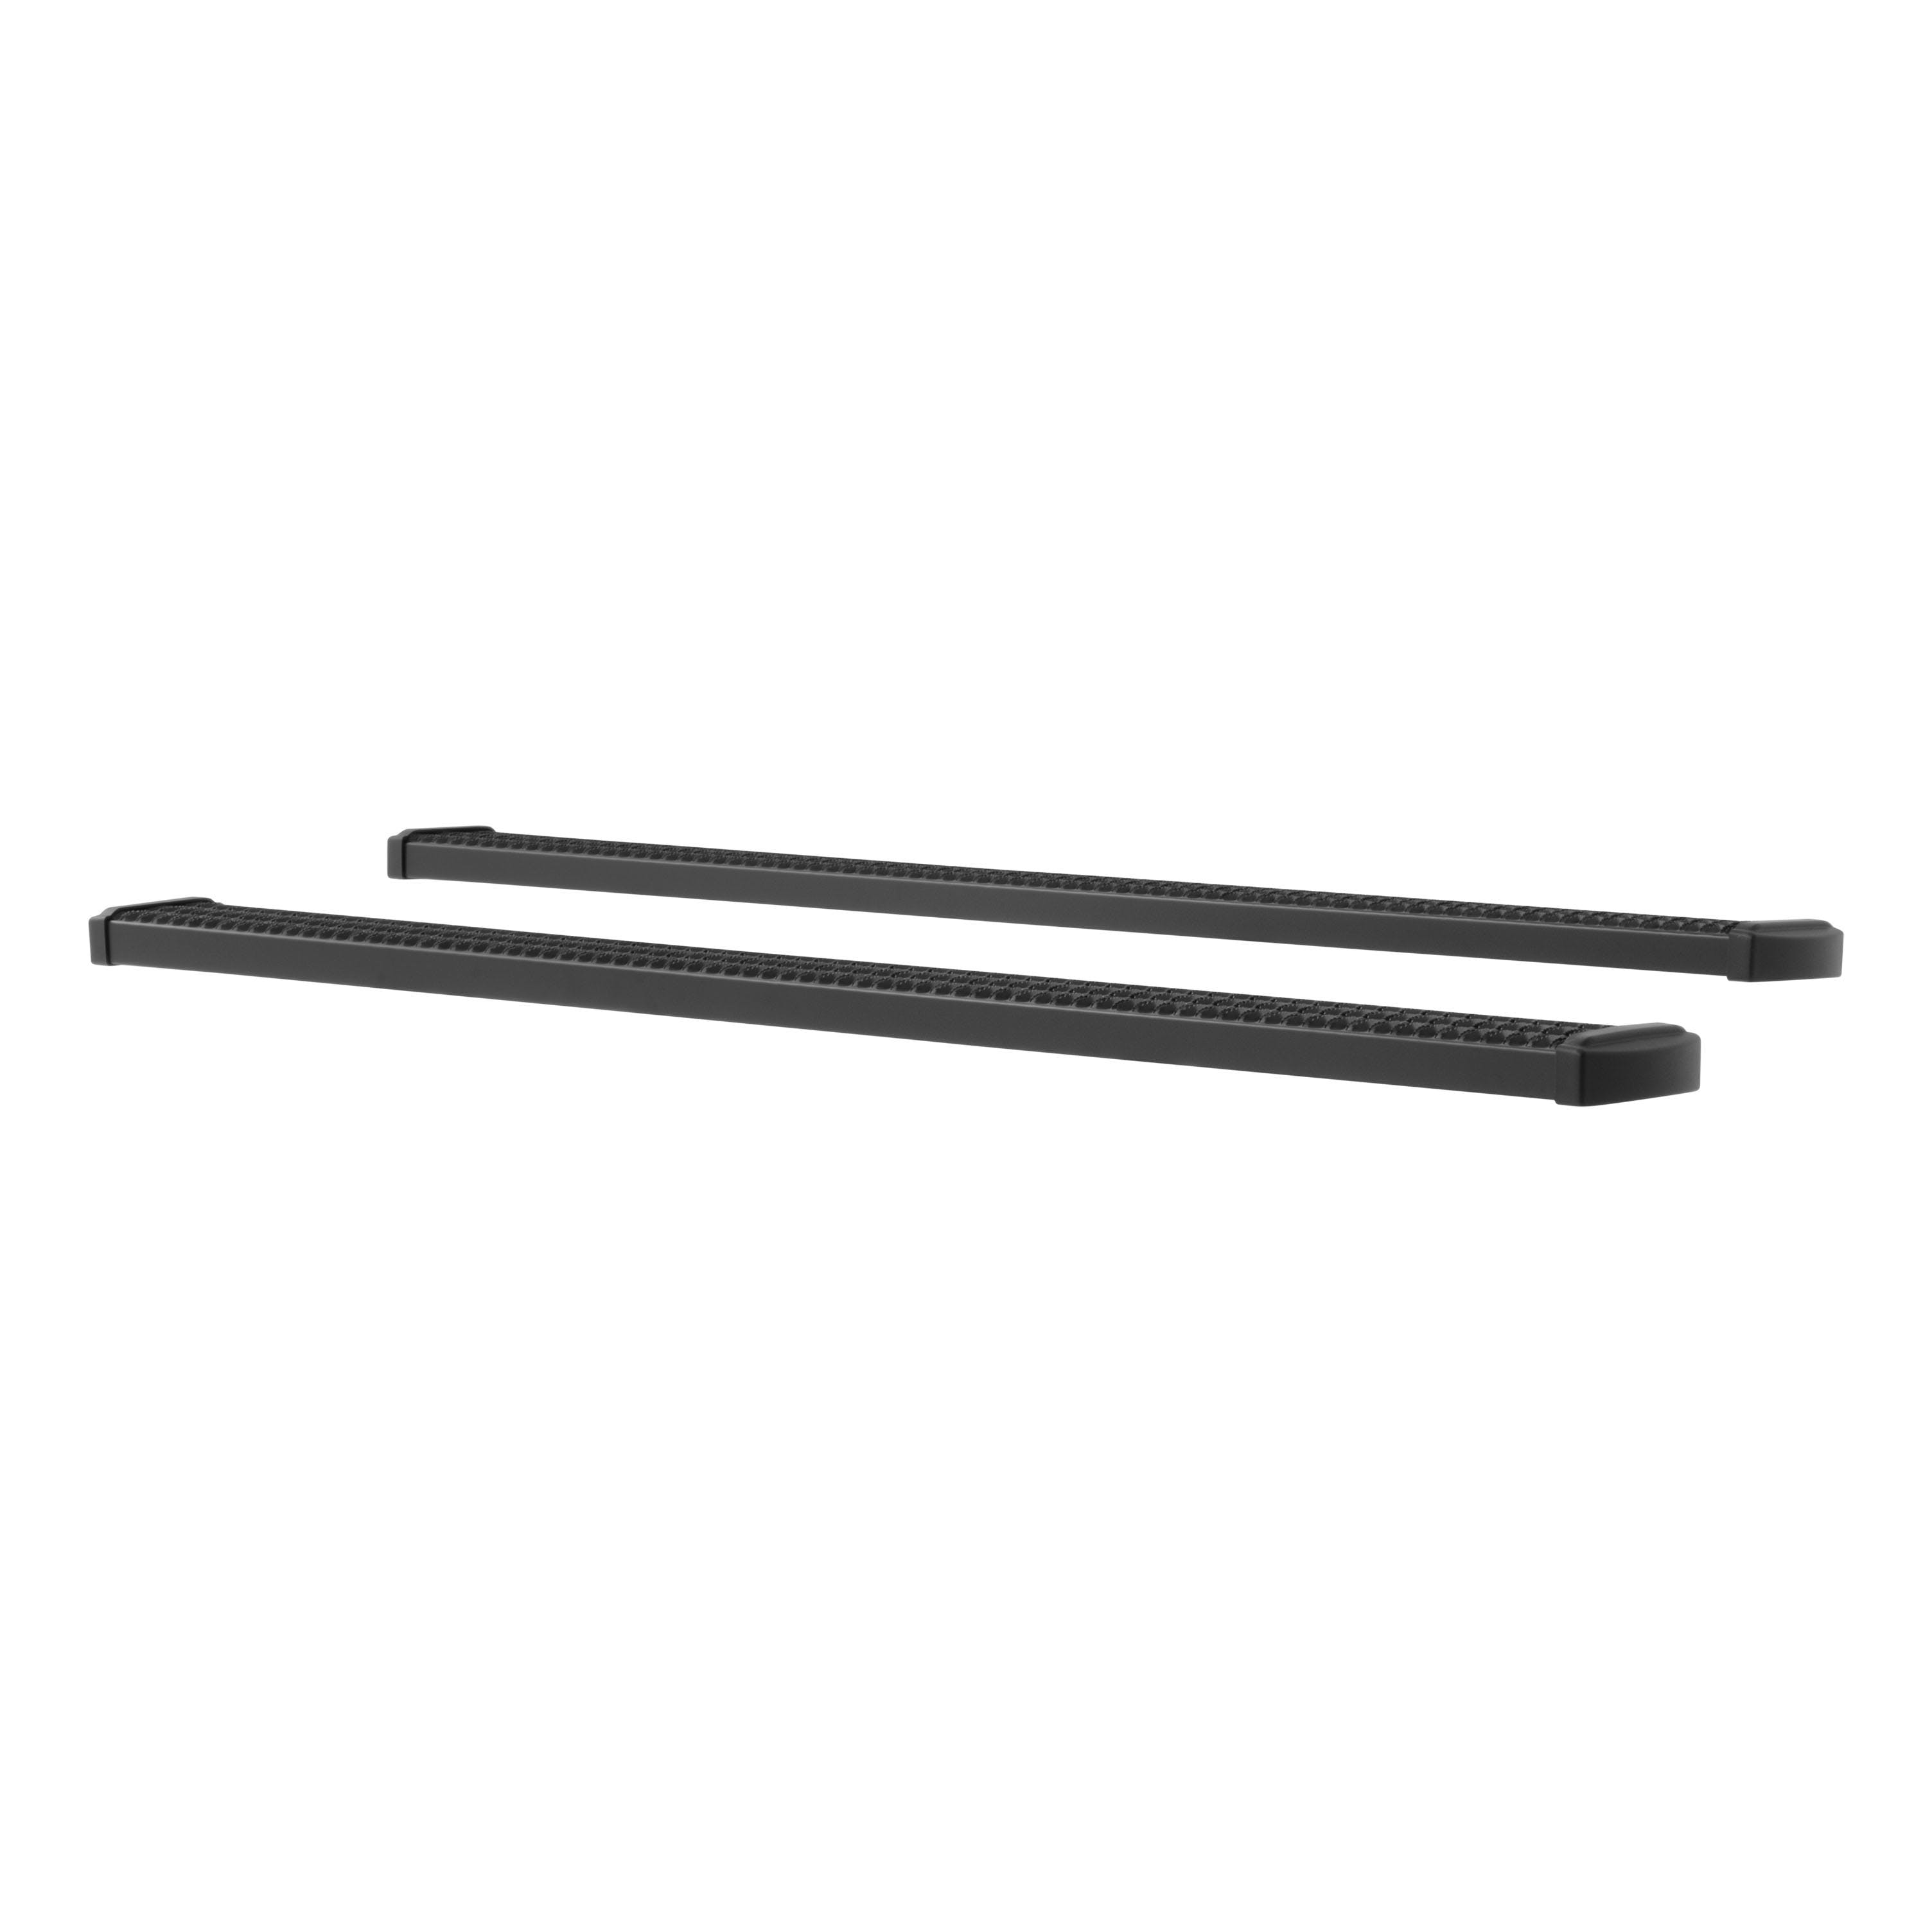 LUVERNE 415088 Grip Step 7-inch Running Boards